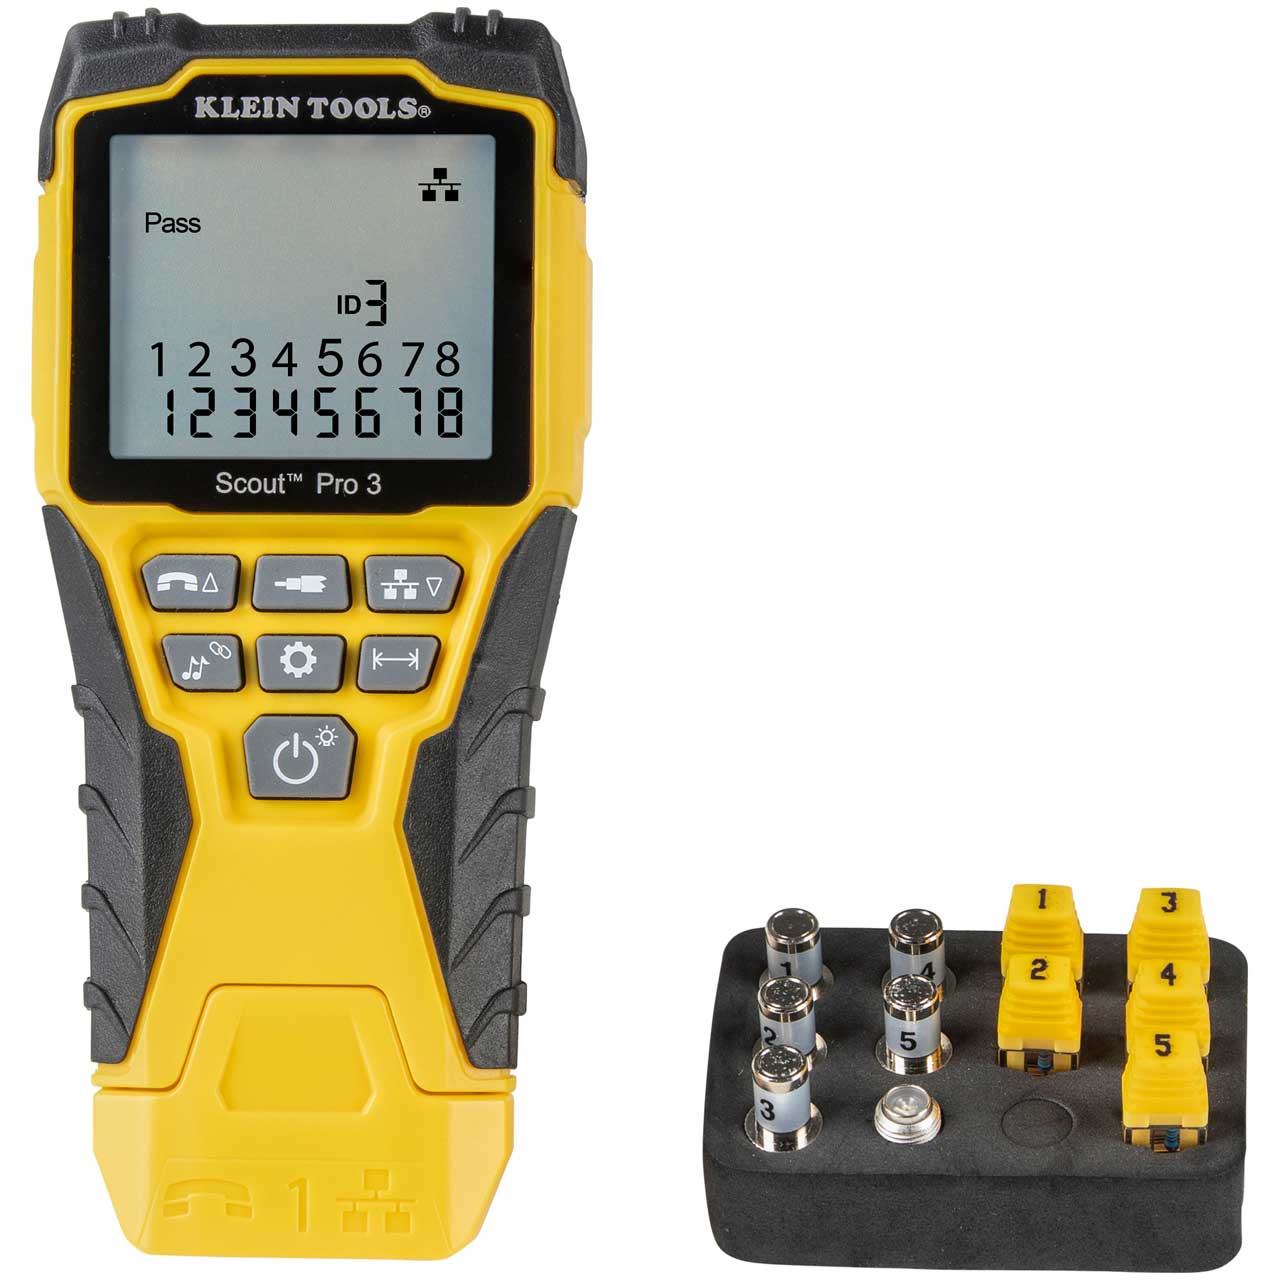 Test Up To 4 Locations Explorer 2 Kl Coax Tester Tracer Mapper With Remote Kit 